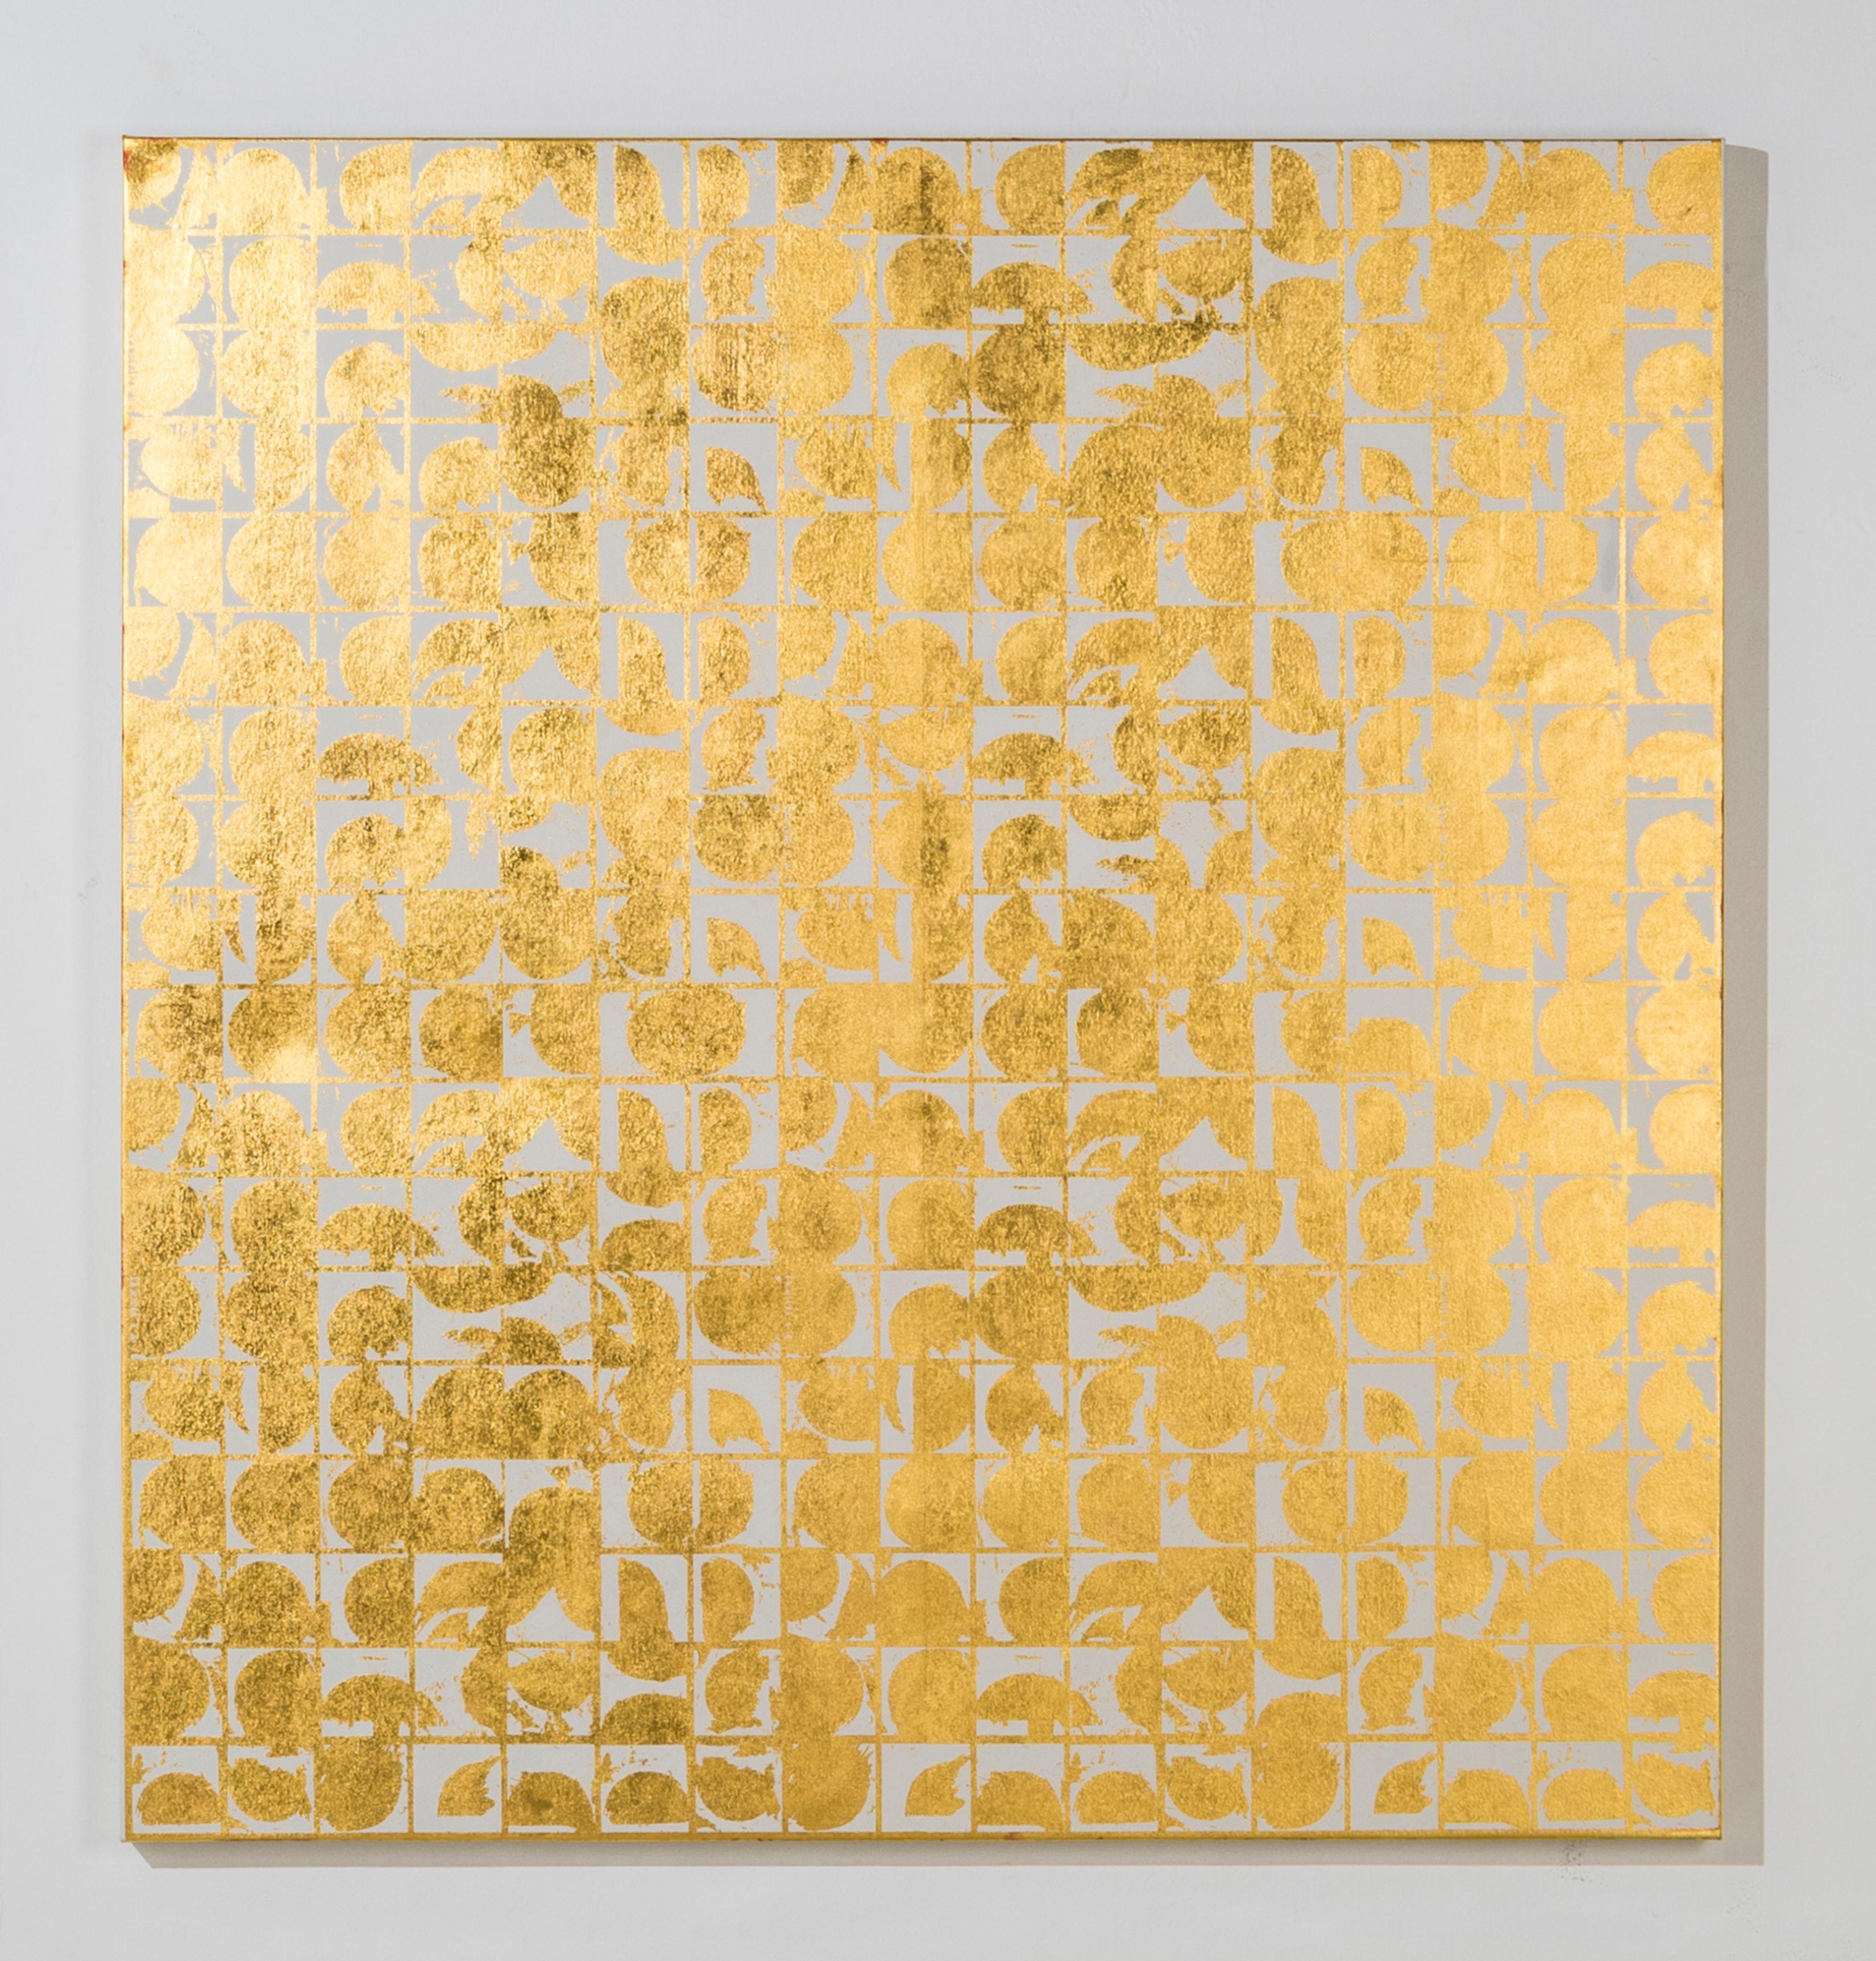 ROUNDS NEGATIVE CANVAS I (BONE) (design gold white metallic work on canvas) - Abstract Geometric Mixed Media Art by Lisa Hunt